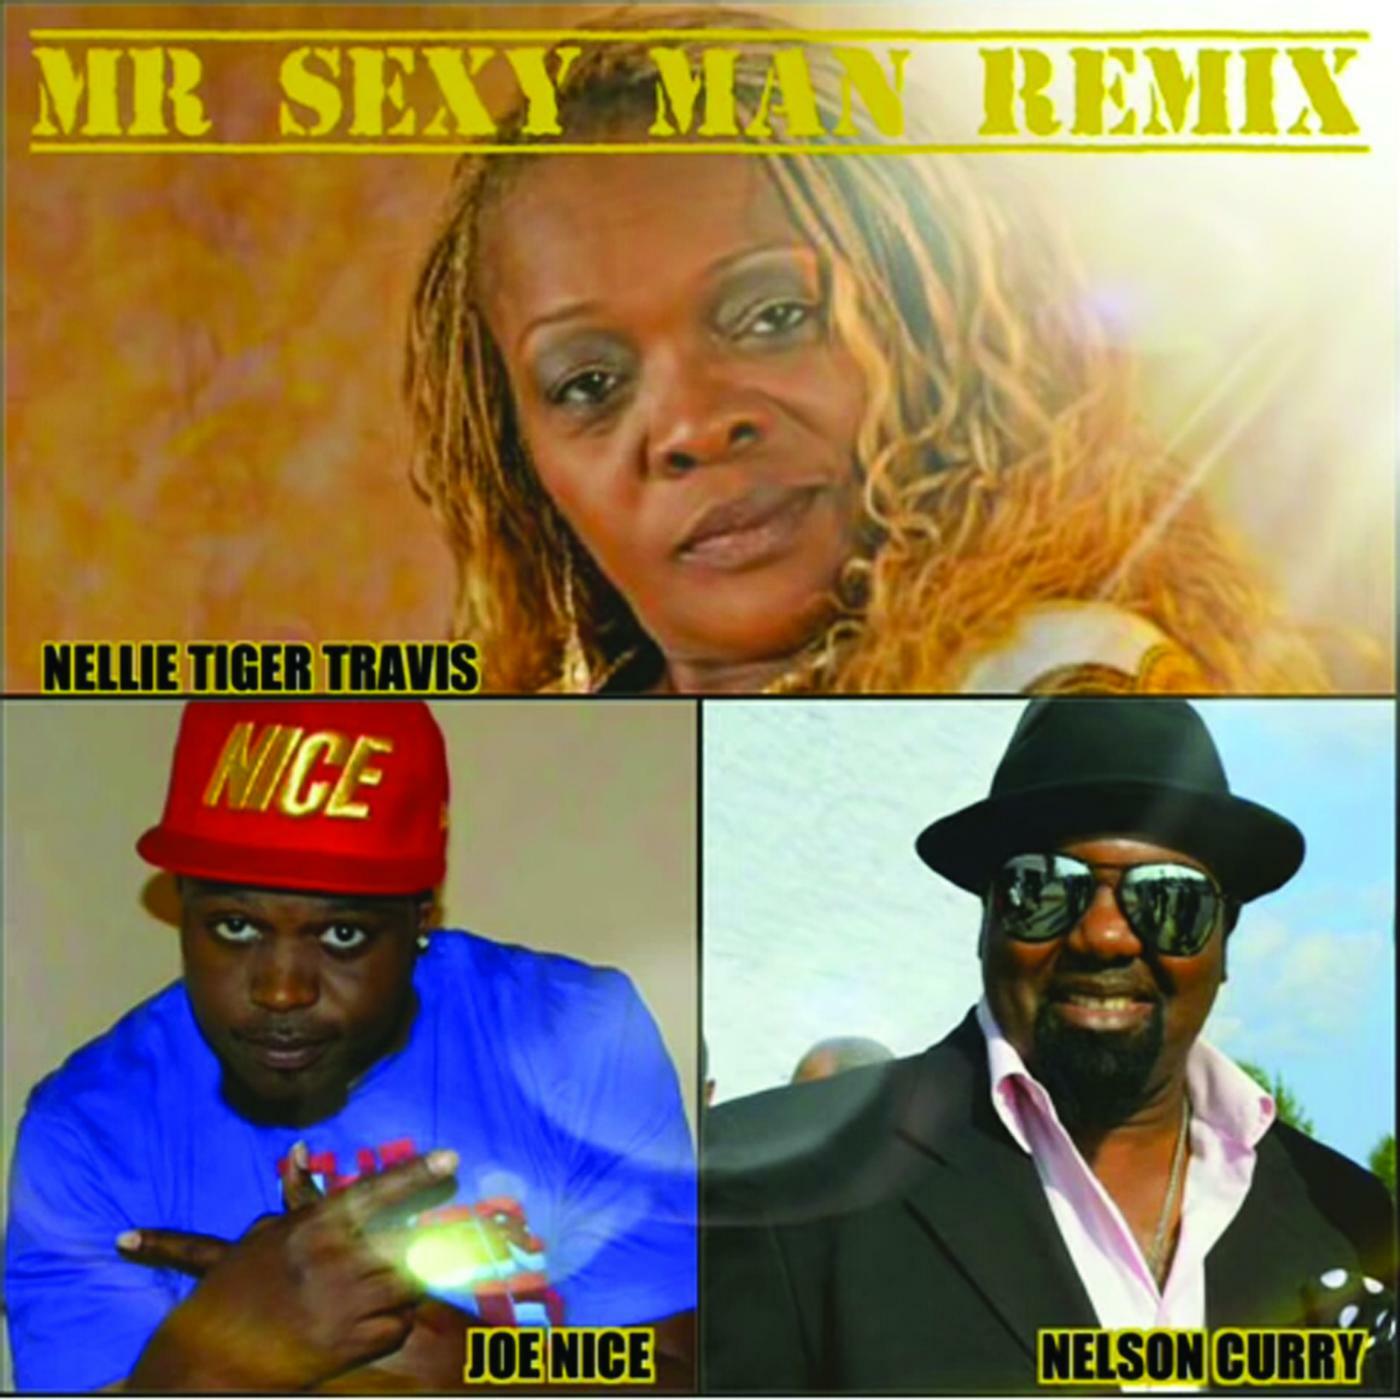 Nellie Tiger Travis Mr Sexy Man Remix Feat Nelson Curry And Joe